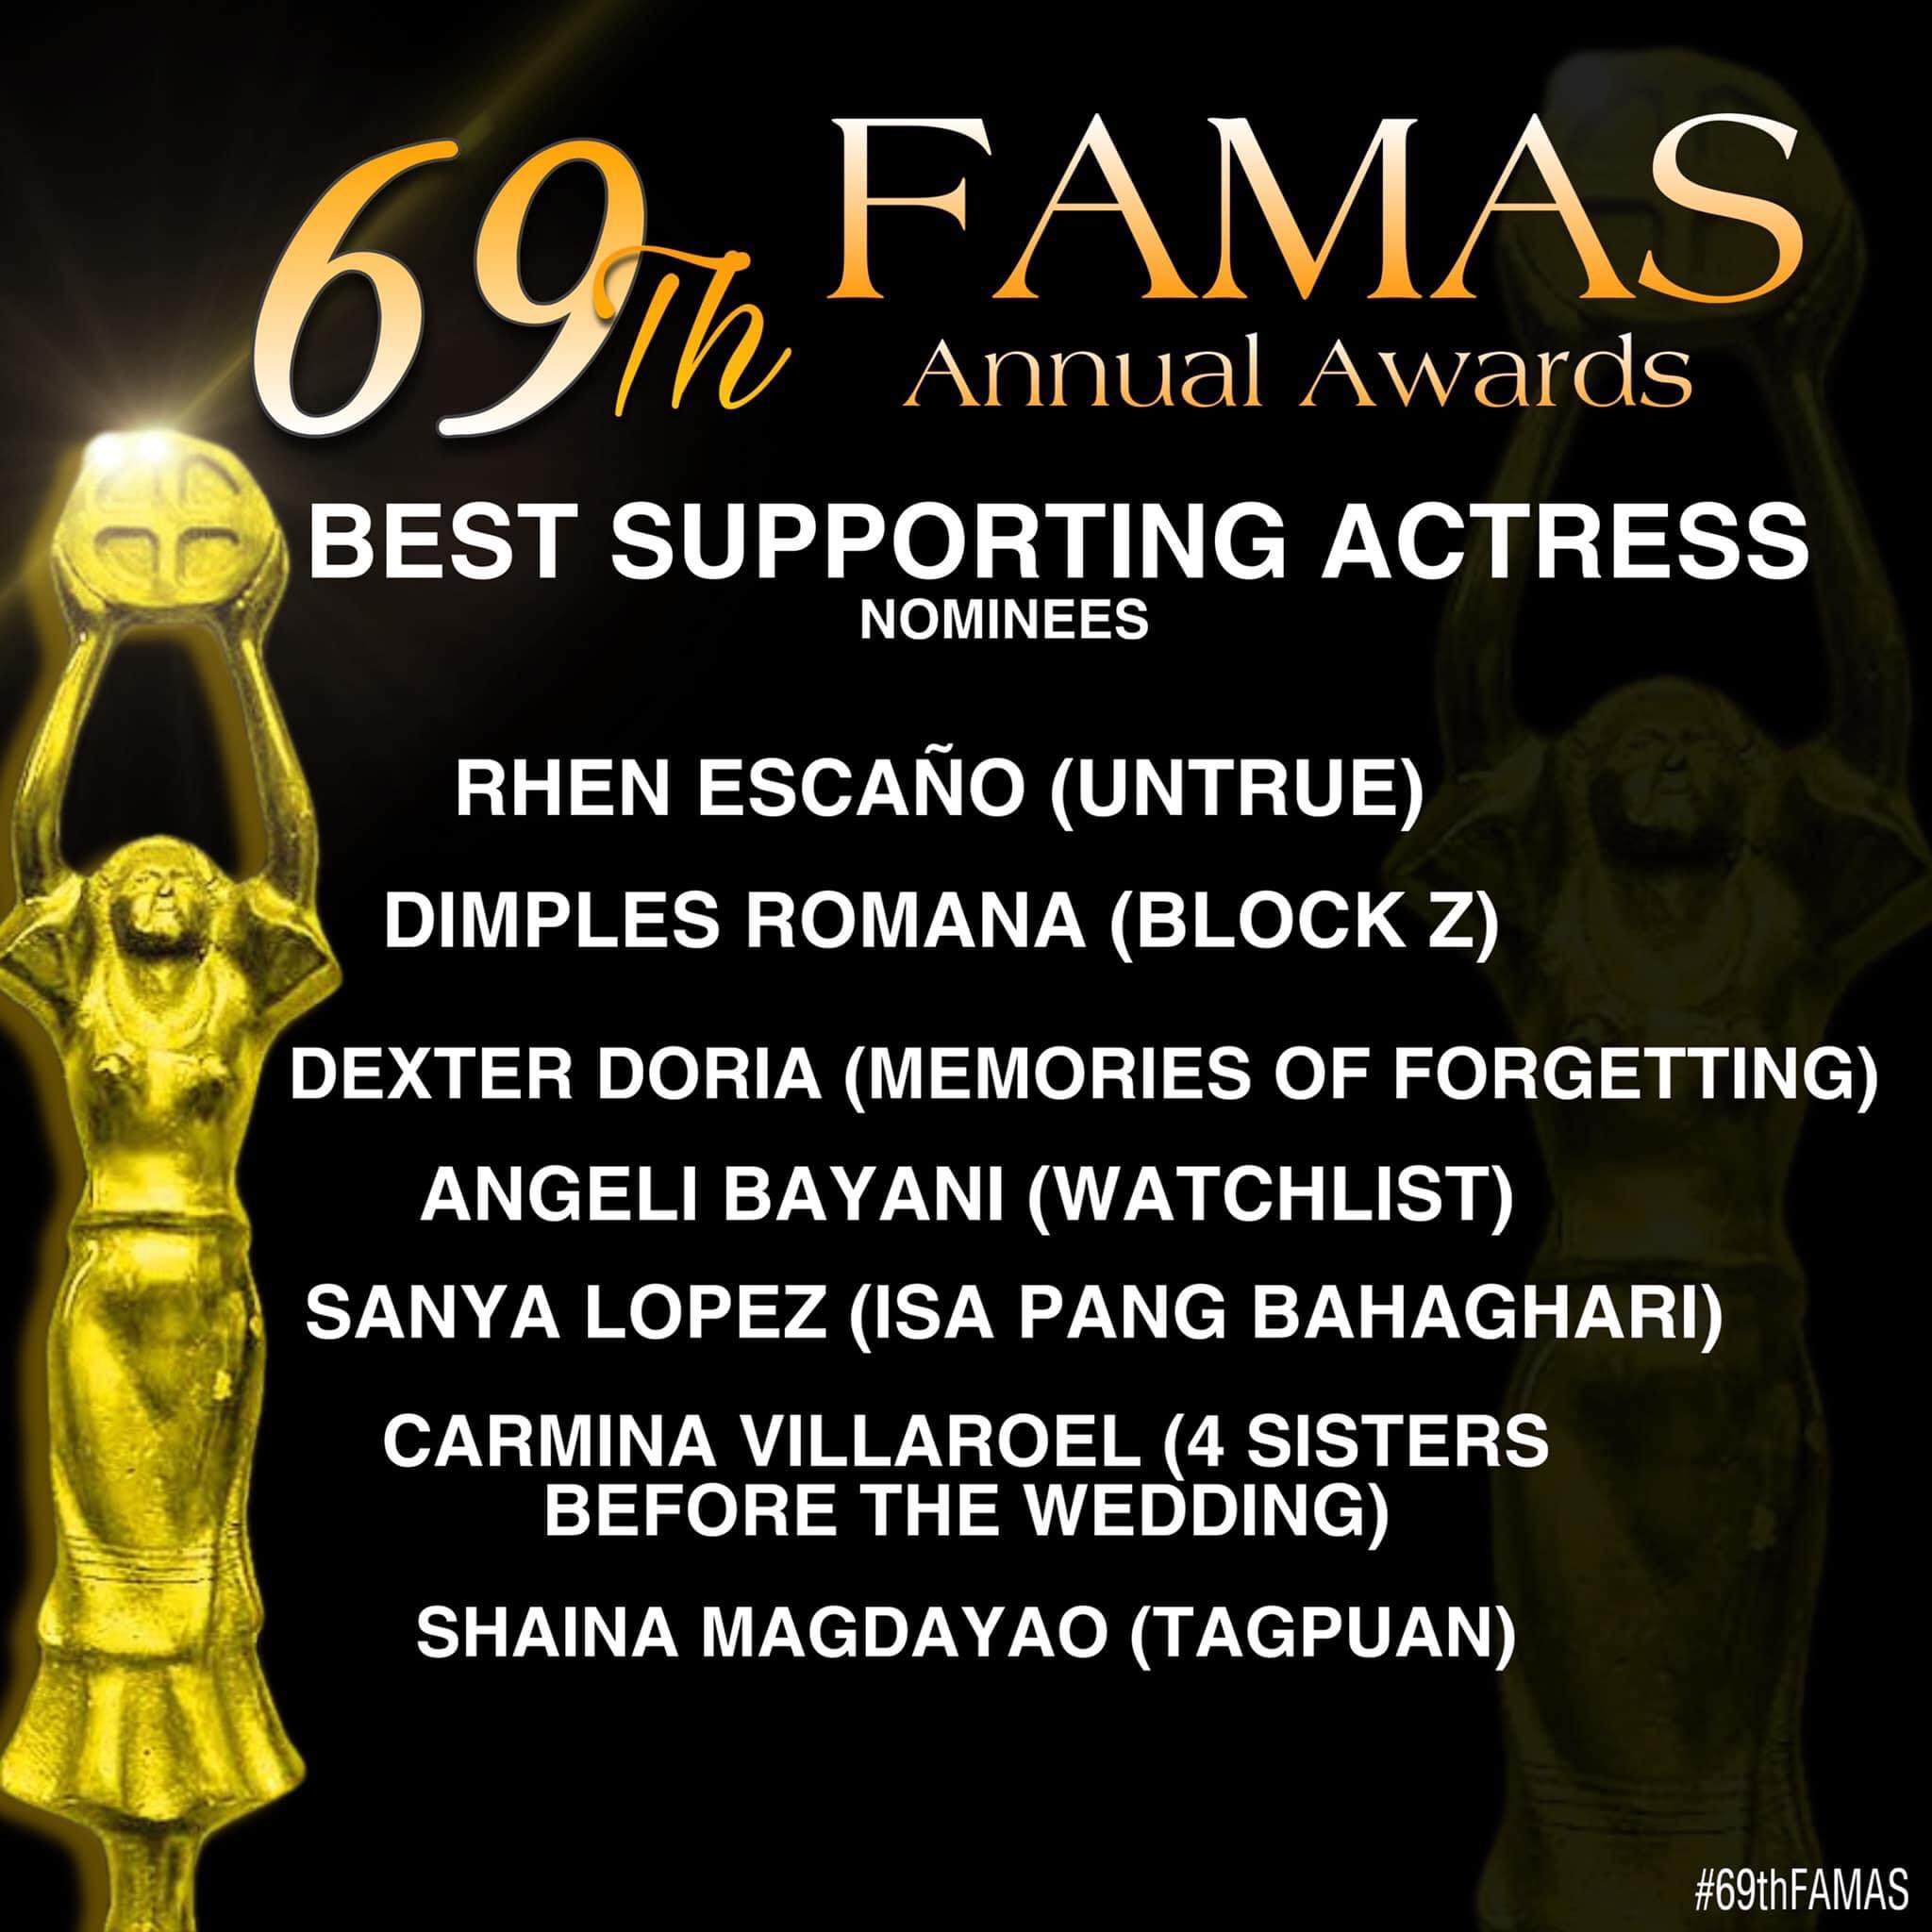 69th famas best supporting actress